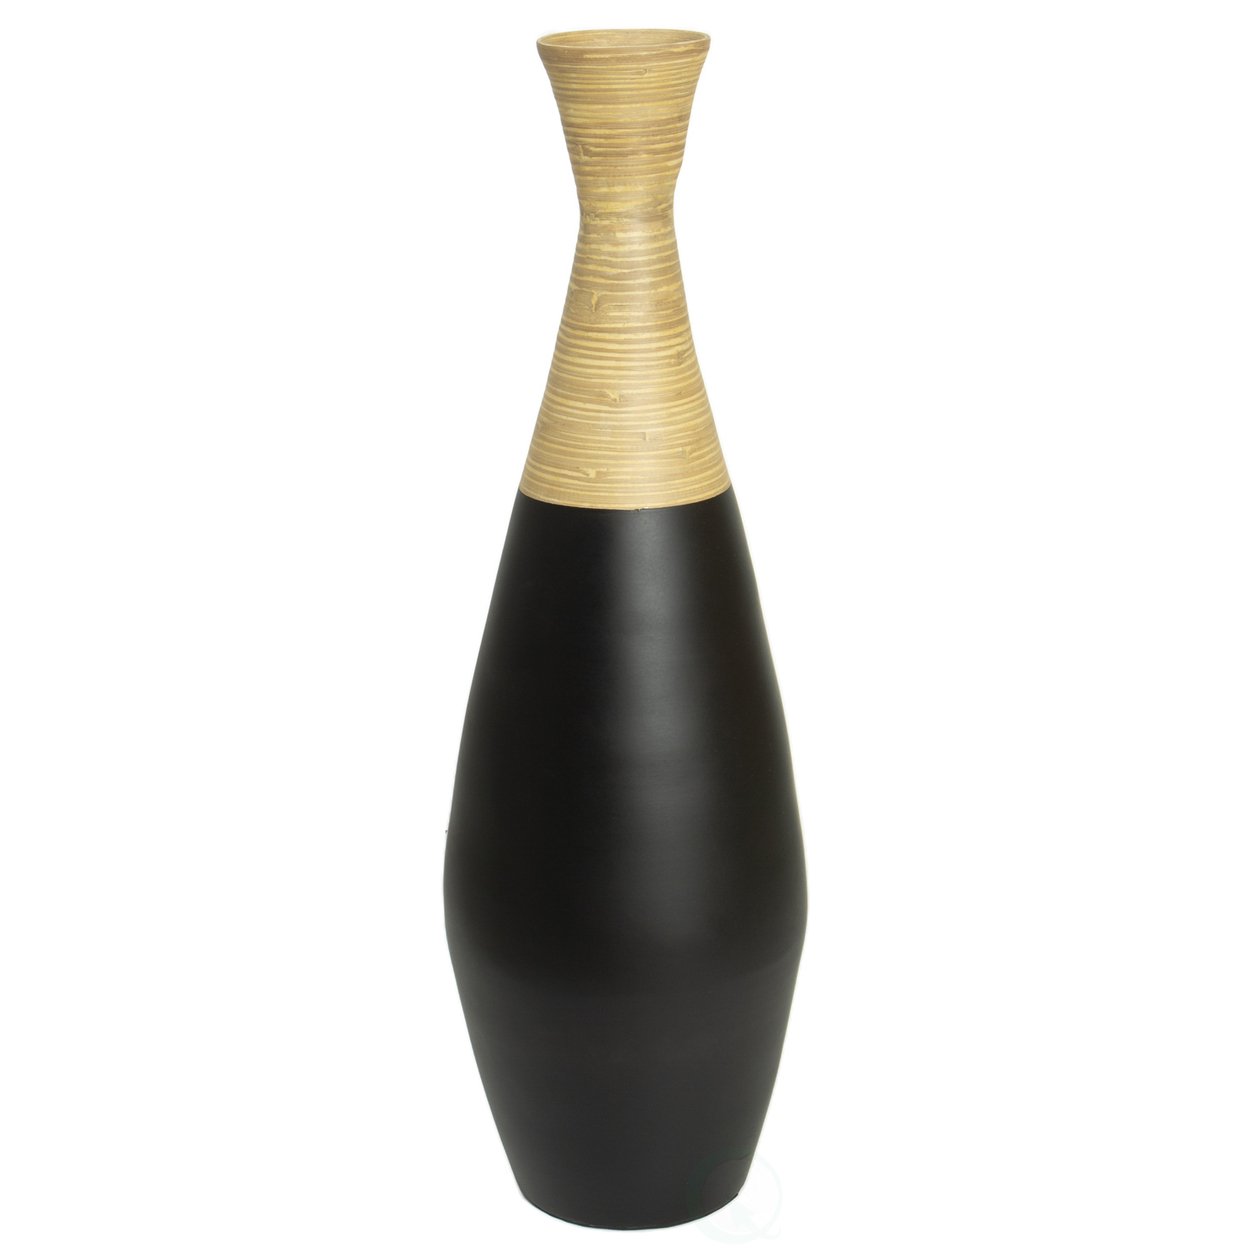 31.5 Inch Spun Bamboo Tall Trumpet Floor Vase - Decorative Home Accent, Natural Bamboo, Indoor Decoration, Sustainable Materials - Black